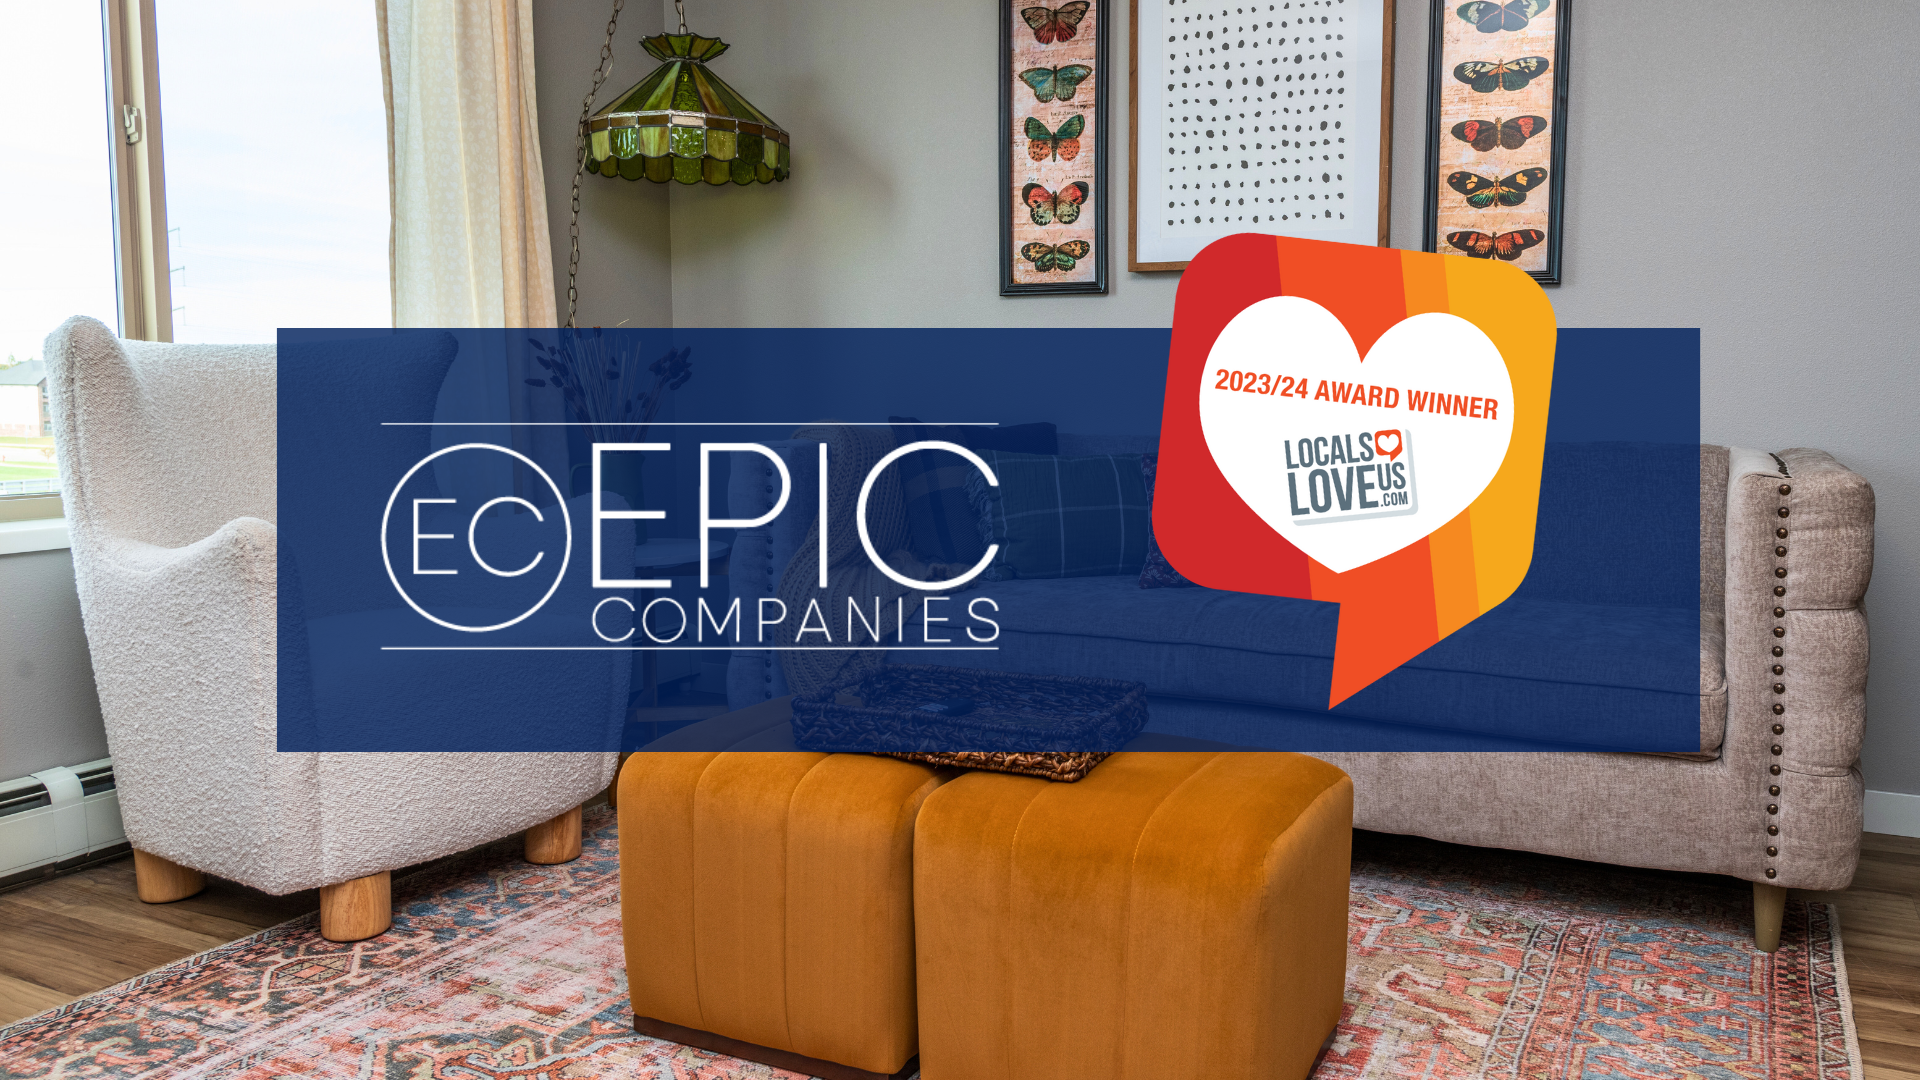 EPIC Companies Receives Locals Love Us Property Management Company Accolade